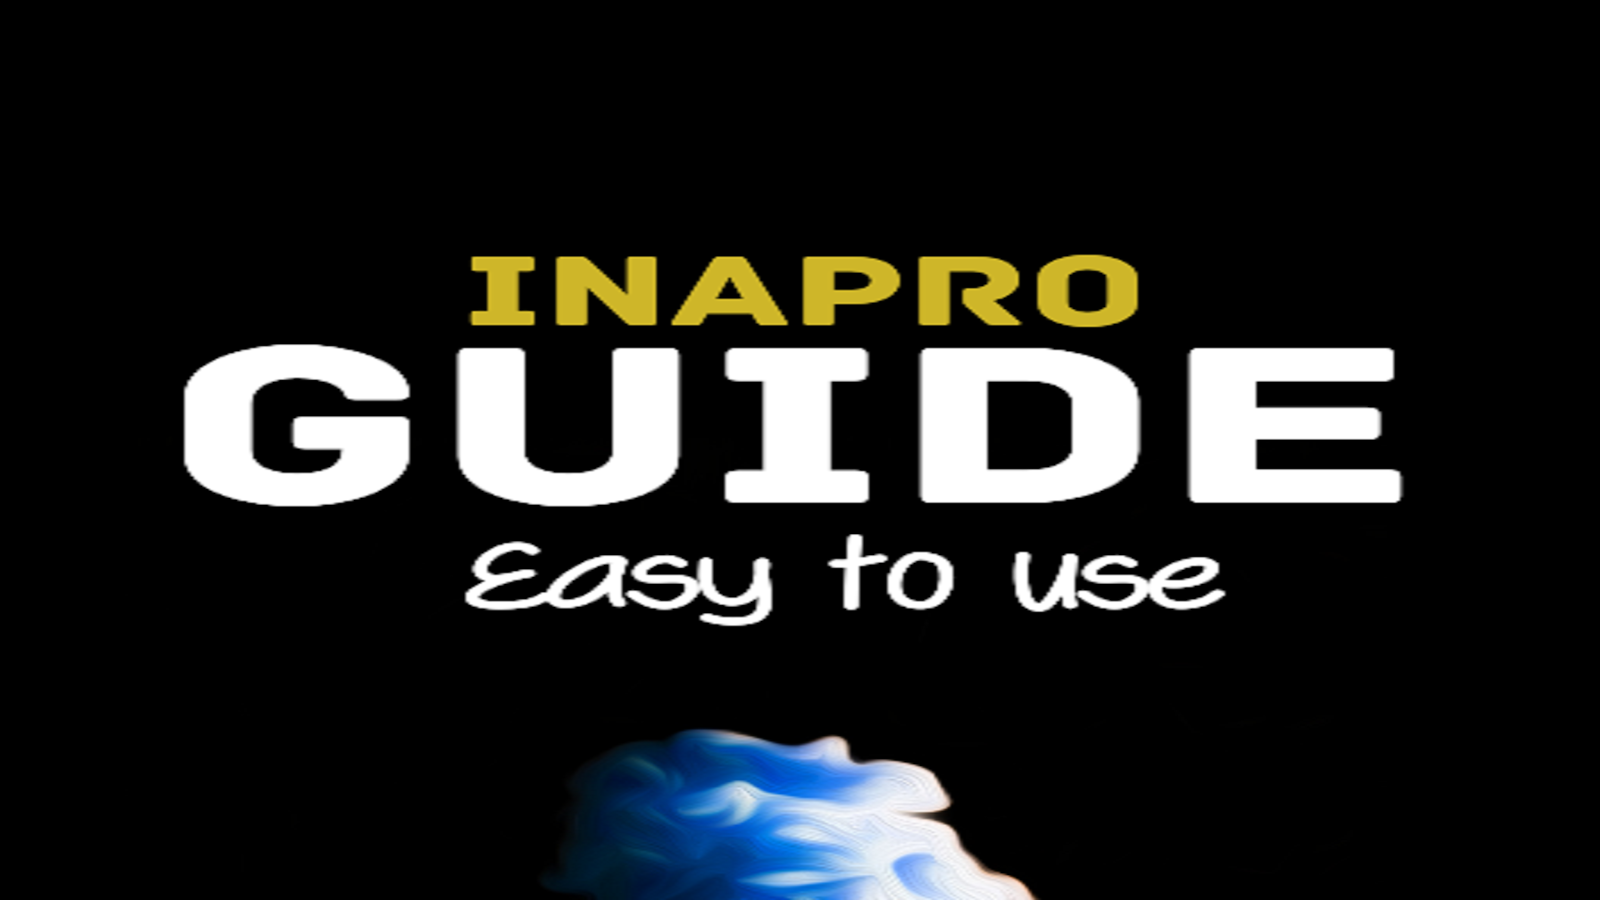 InaPro Guides